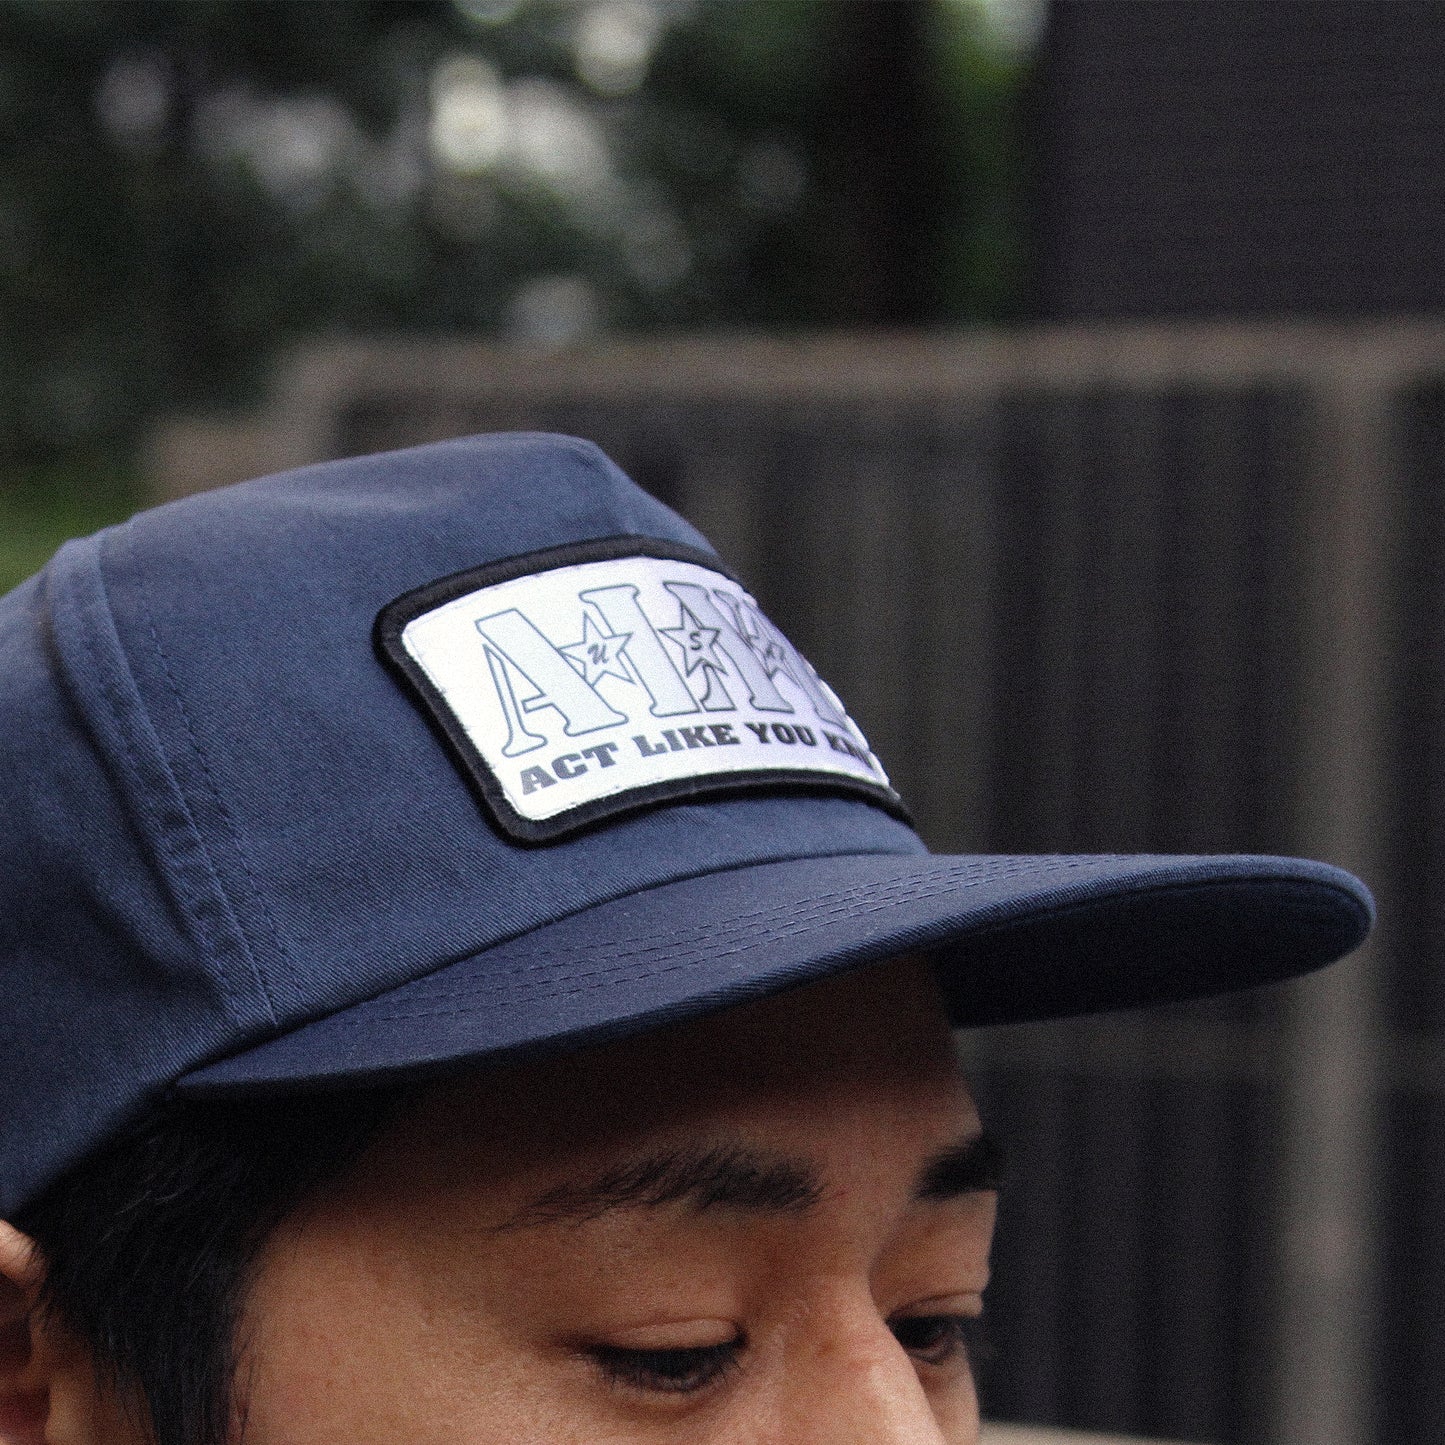 ALYK - Worker Embroidered Patch 5 Panel Snapback Cap/Navy